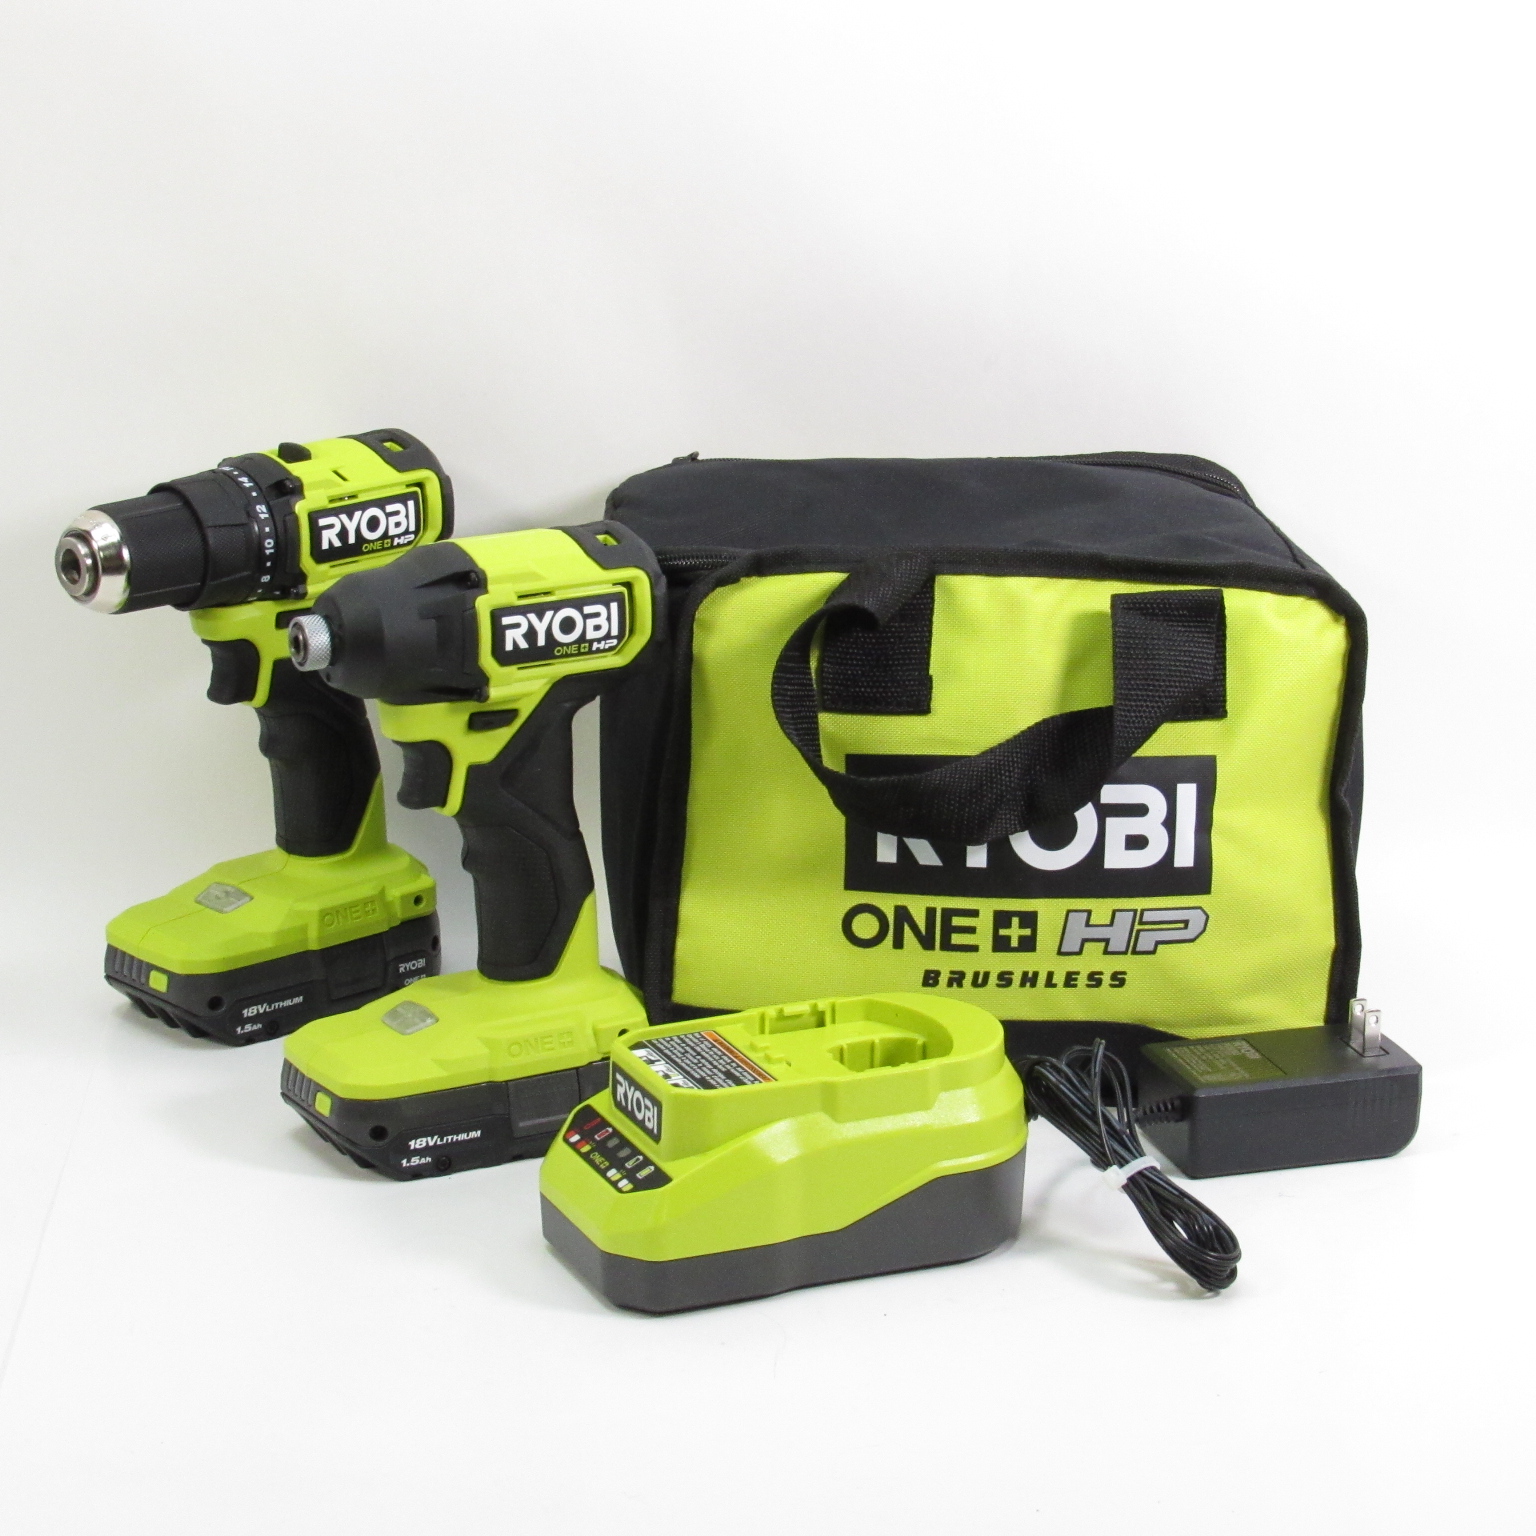 RYOBI ONE+ HP 18V Brushless Cordless 1/2 in. Drill/Driver and